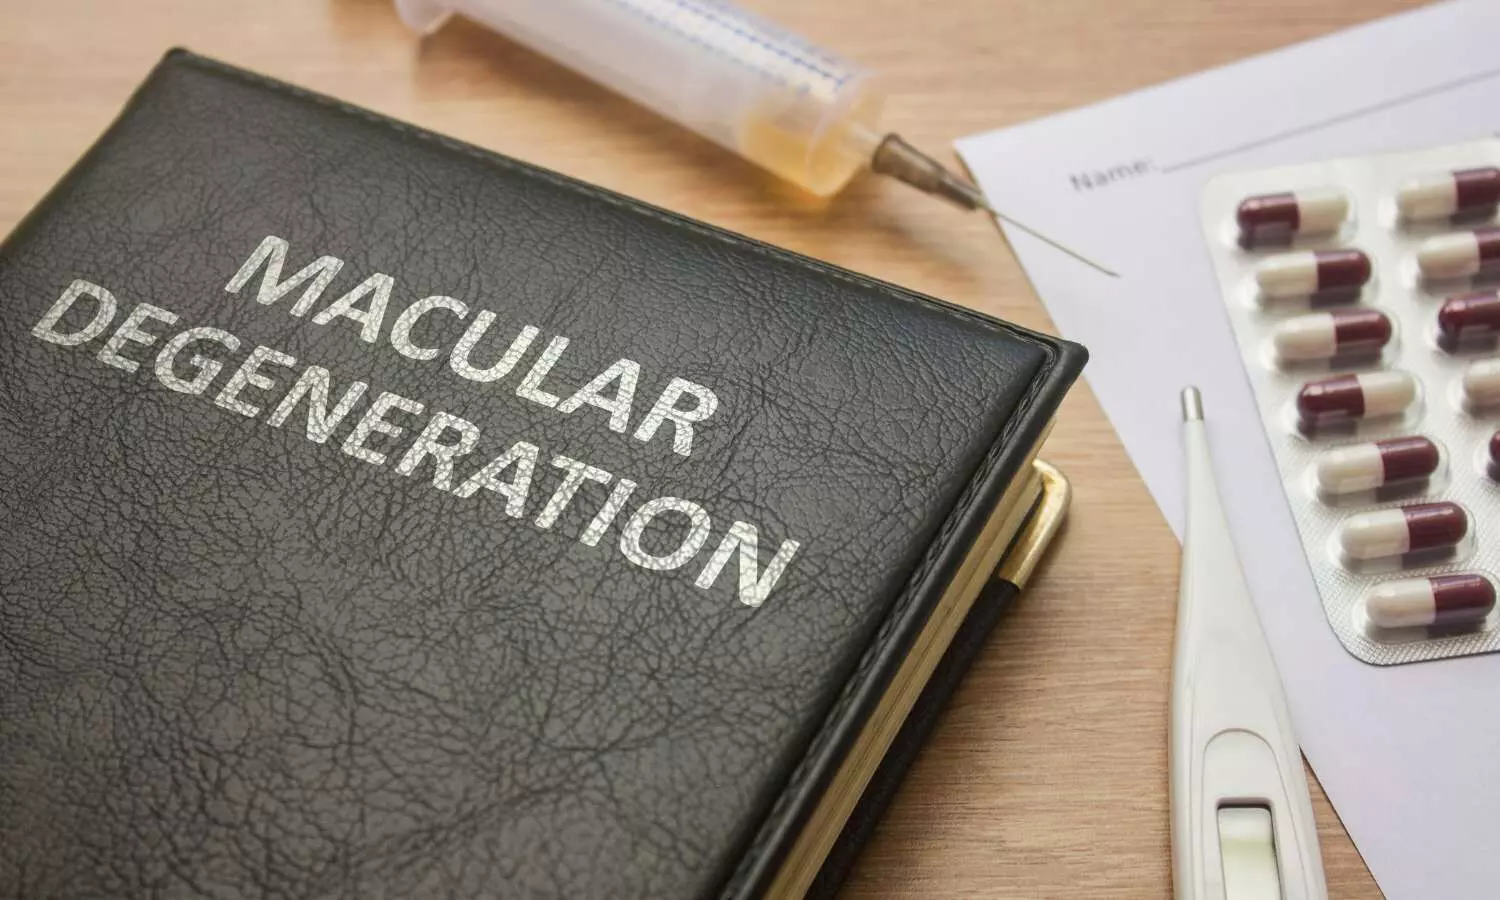 Age-related macular degeneration confers greater risk of COVID-19 infection and mortality